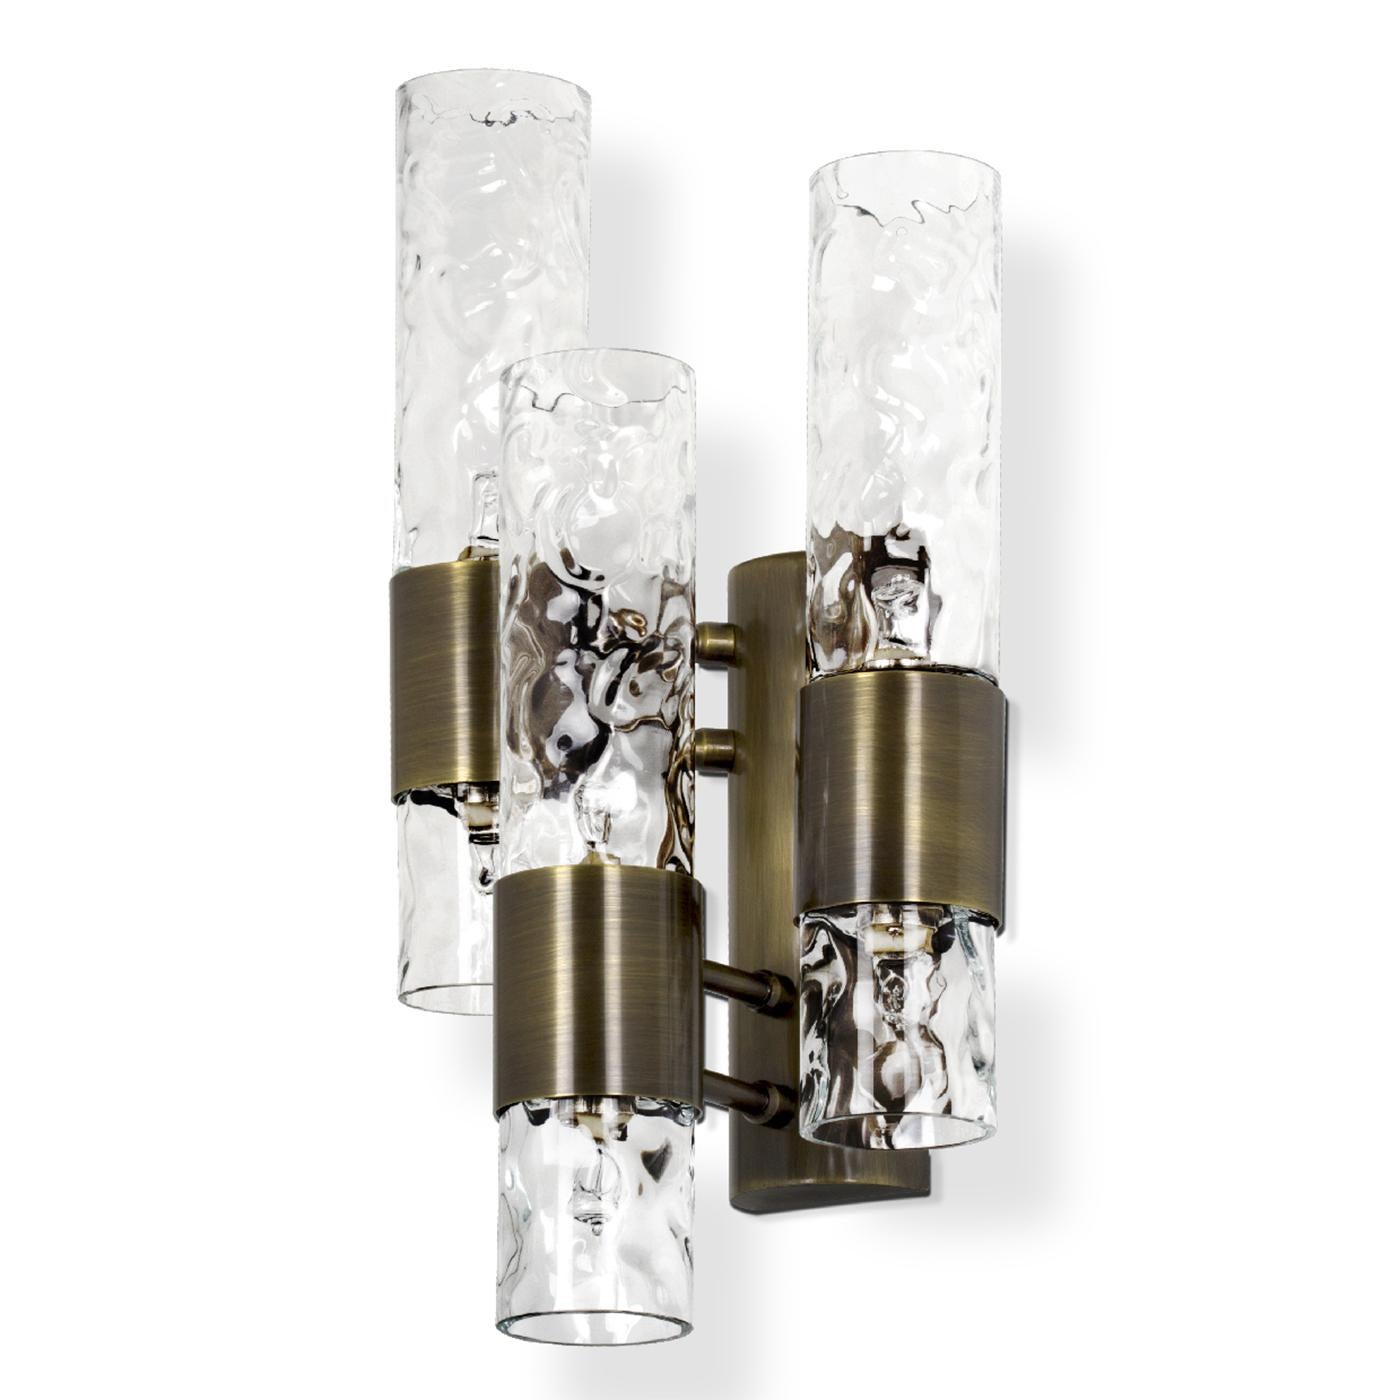 Wall lamp londa with structure in aged brushed solid brass.
With 6 glass shades in hand-crafted ondulated clear glass.
Wall lamp with 6 bulbs, bulbs not included.